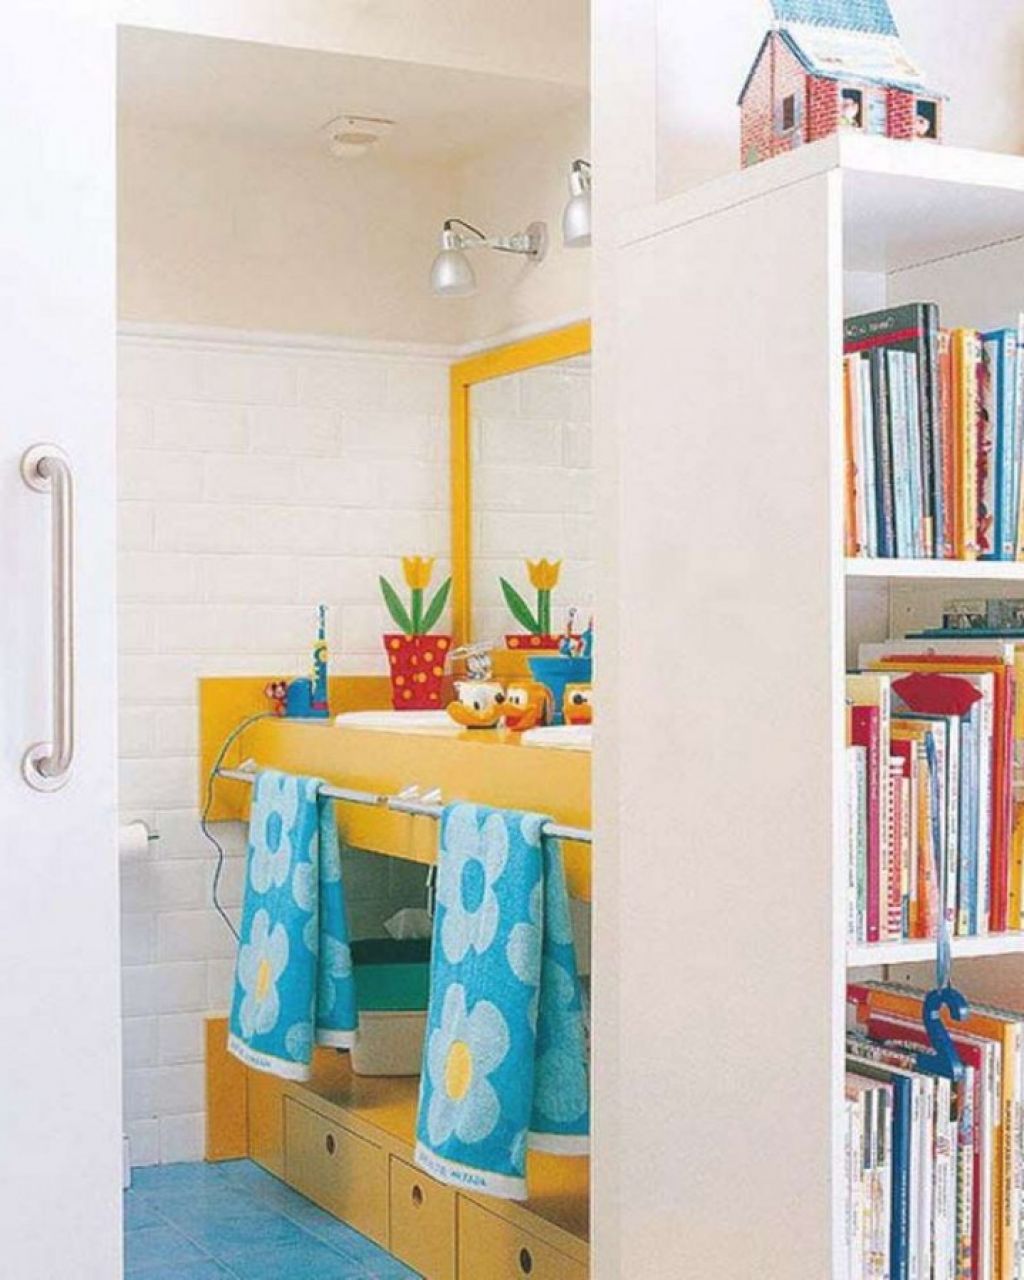 Bookshelf Room With Exciting White Bookshelf Room Divider Mixed With Trendy Kids Bathroom Ideas With Polka Dots Planter Bathroom Cheerful And Friendly Bathroom Ideas For Kids